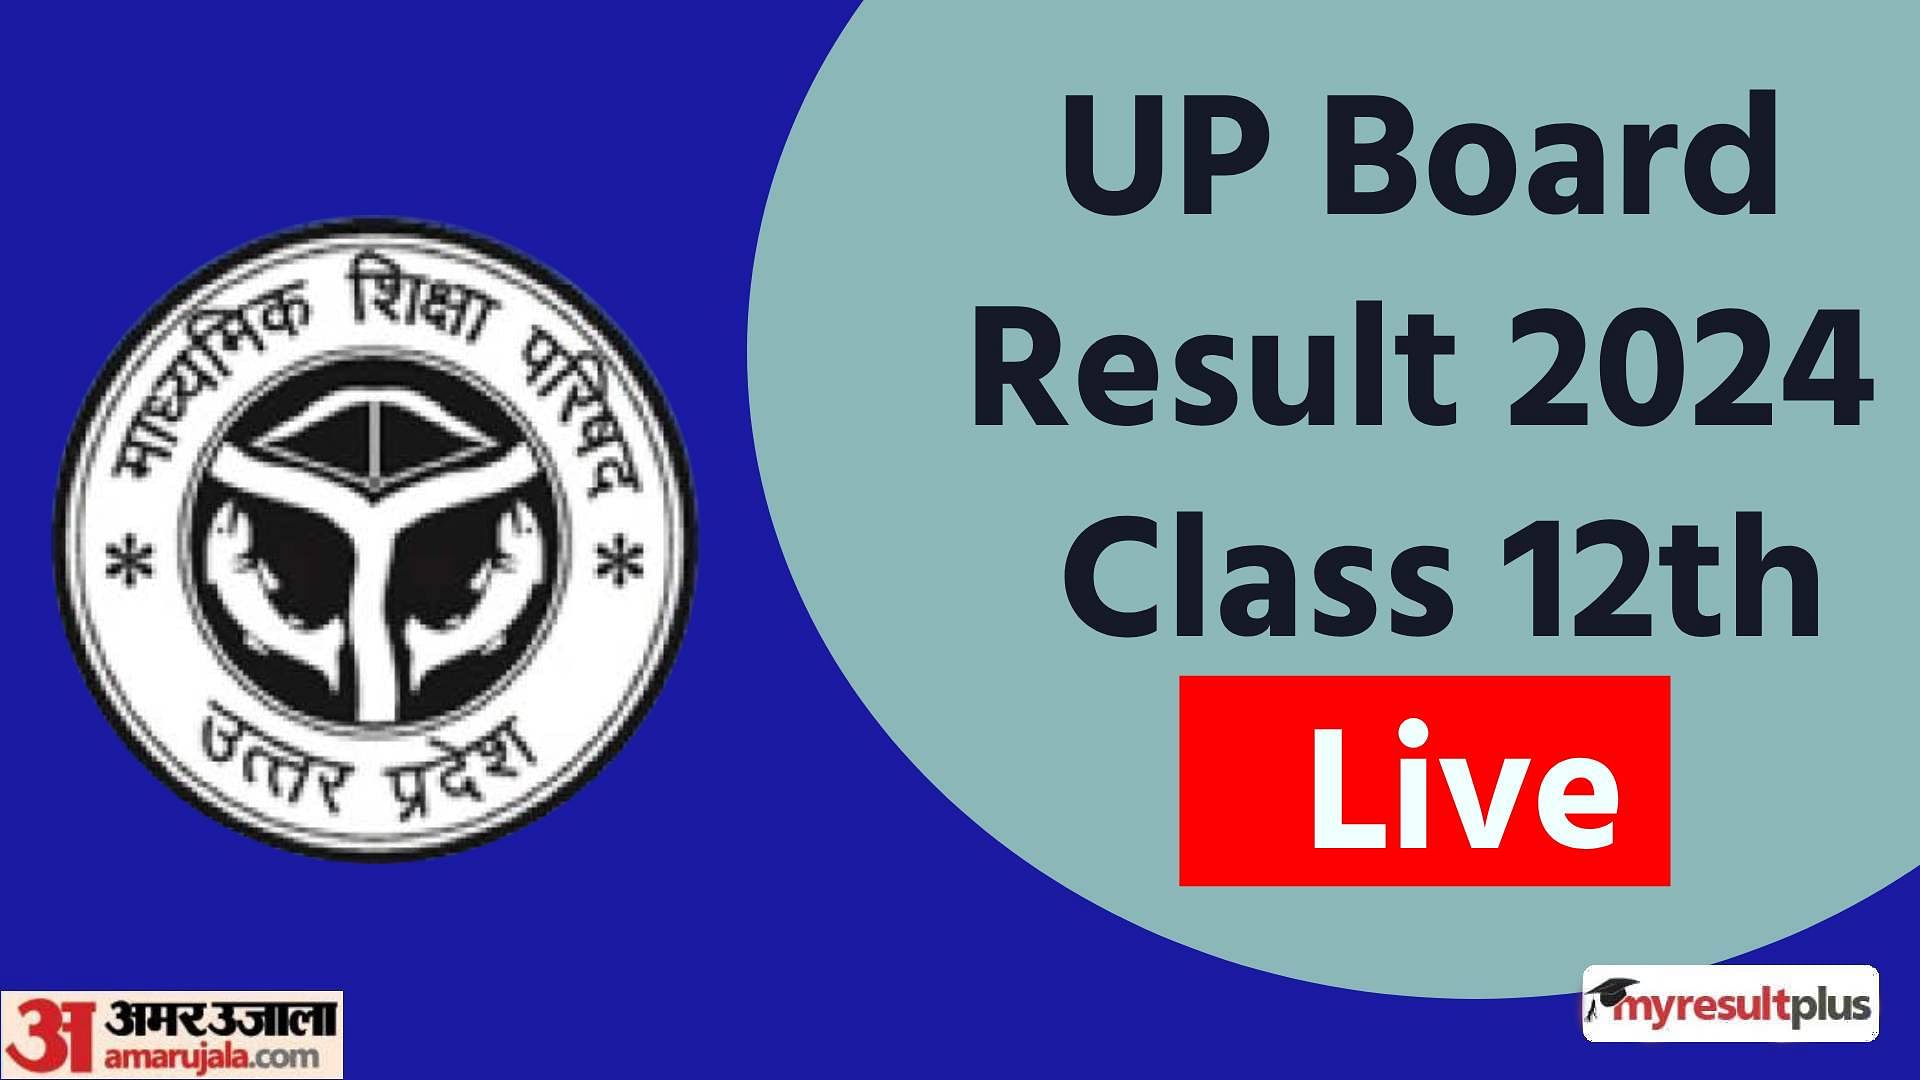 Class 12 UP Board Inter Result Awaited, Check Details, latest information and updates here